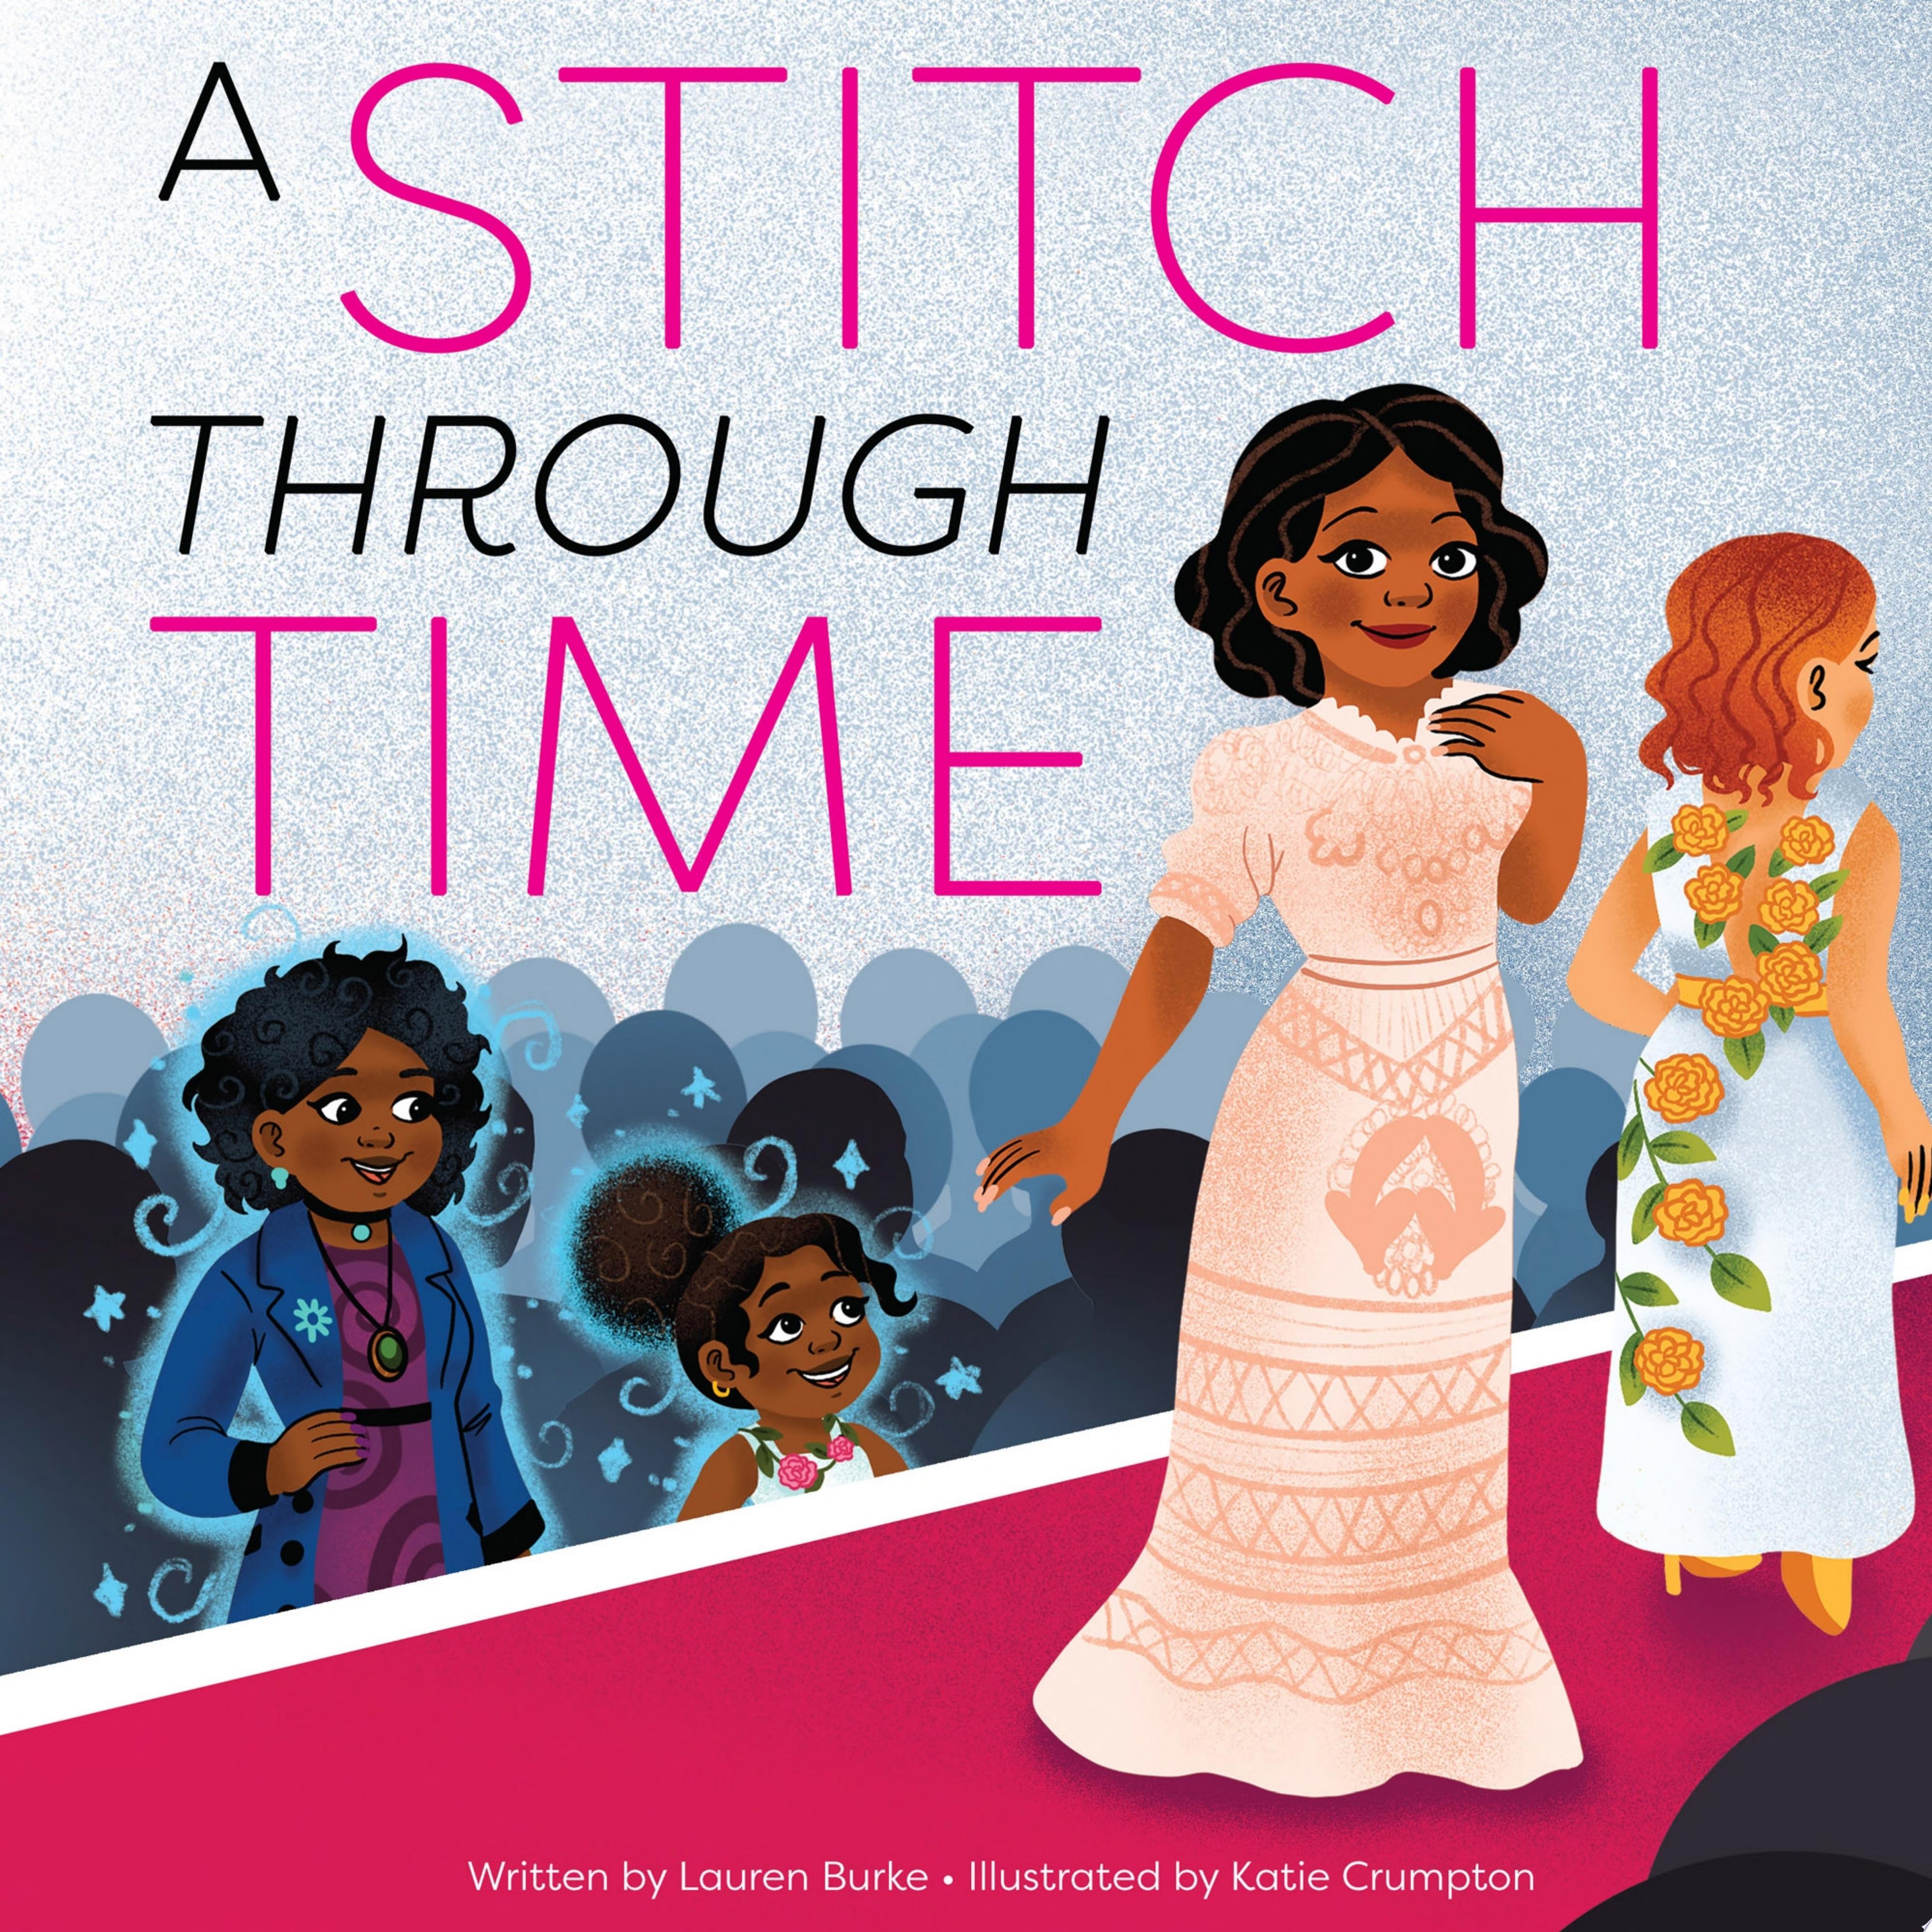 Image for "A Stitch Through Time"